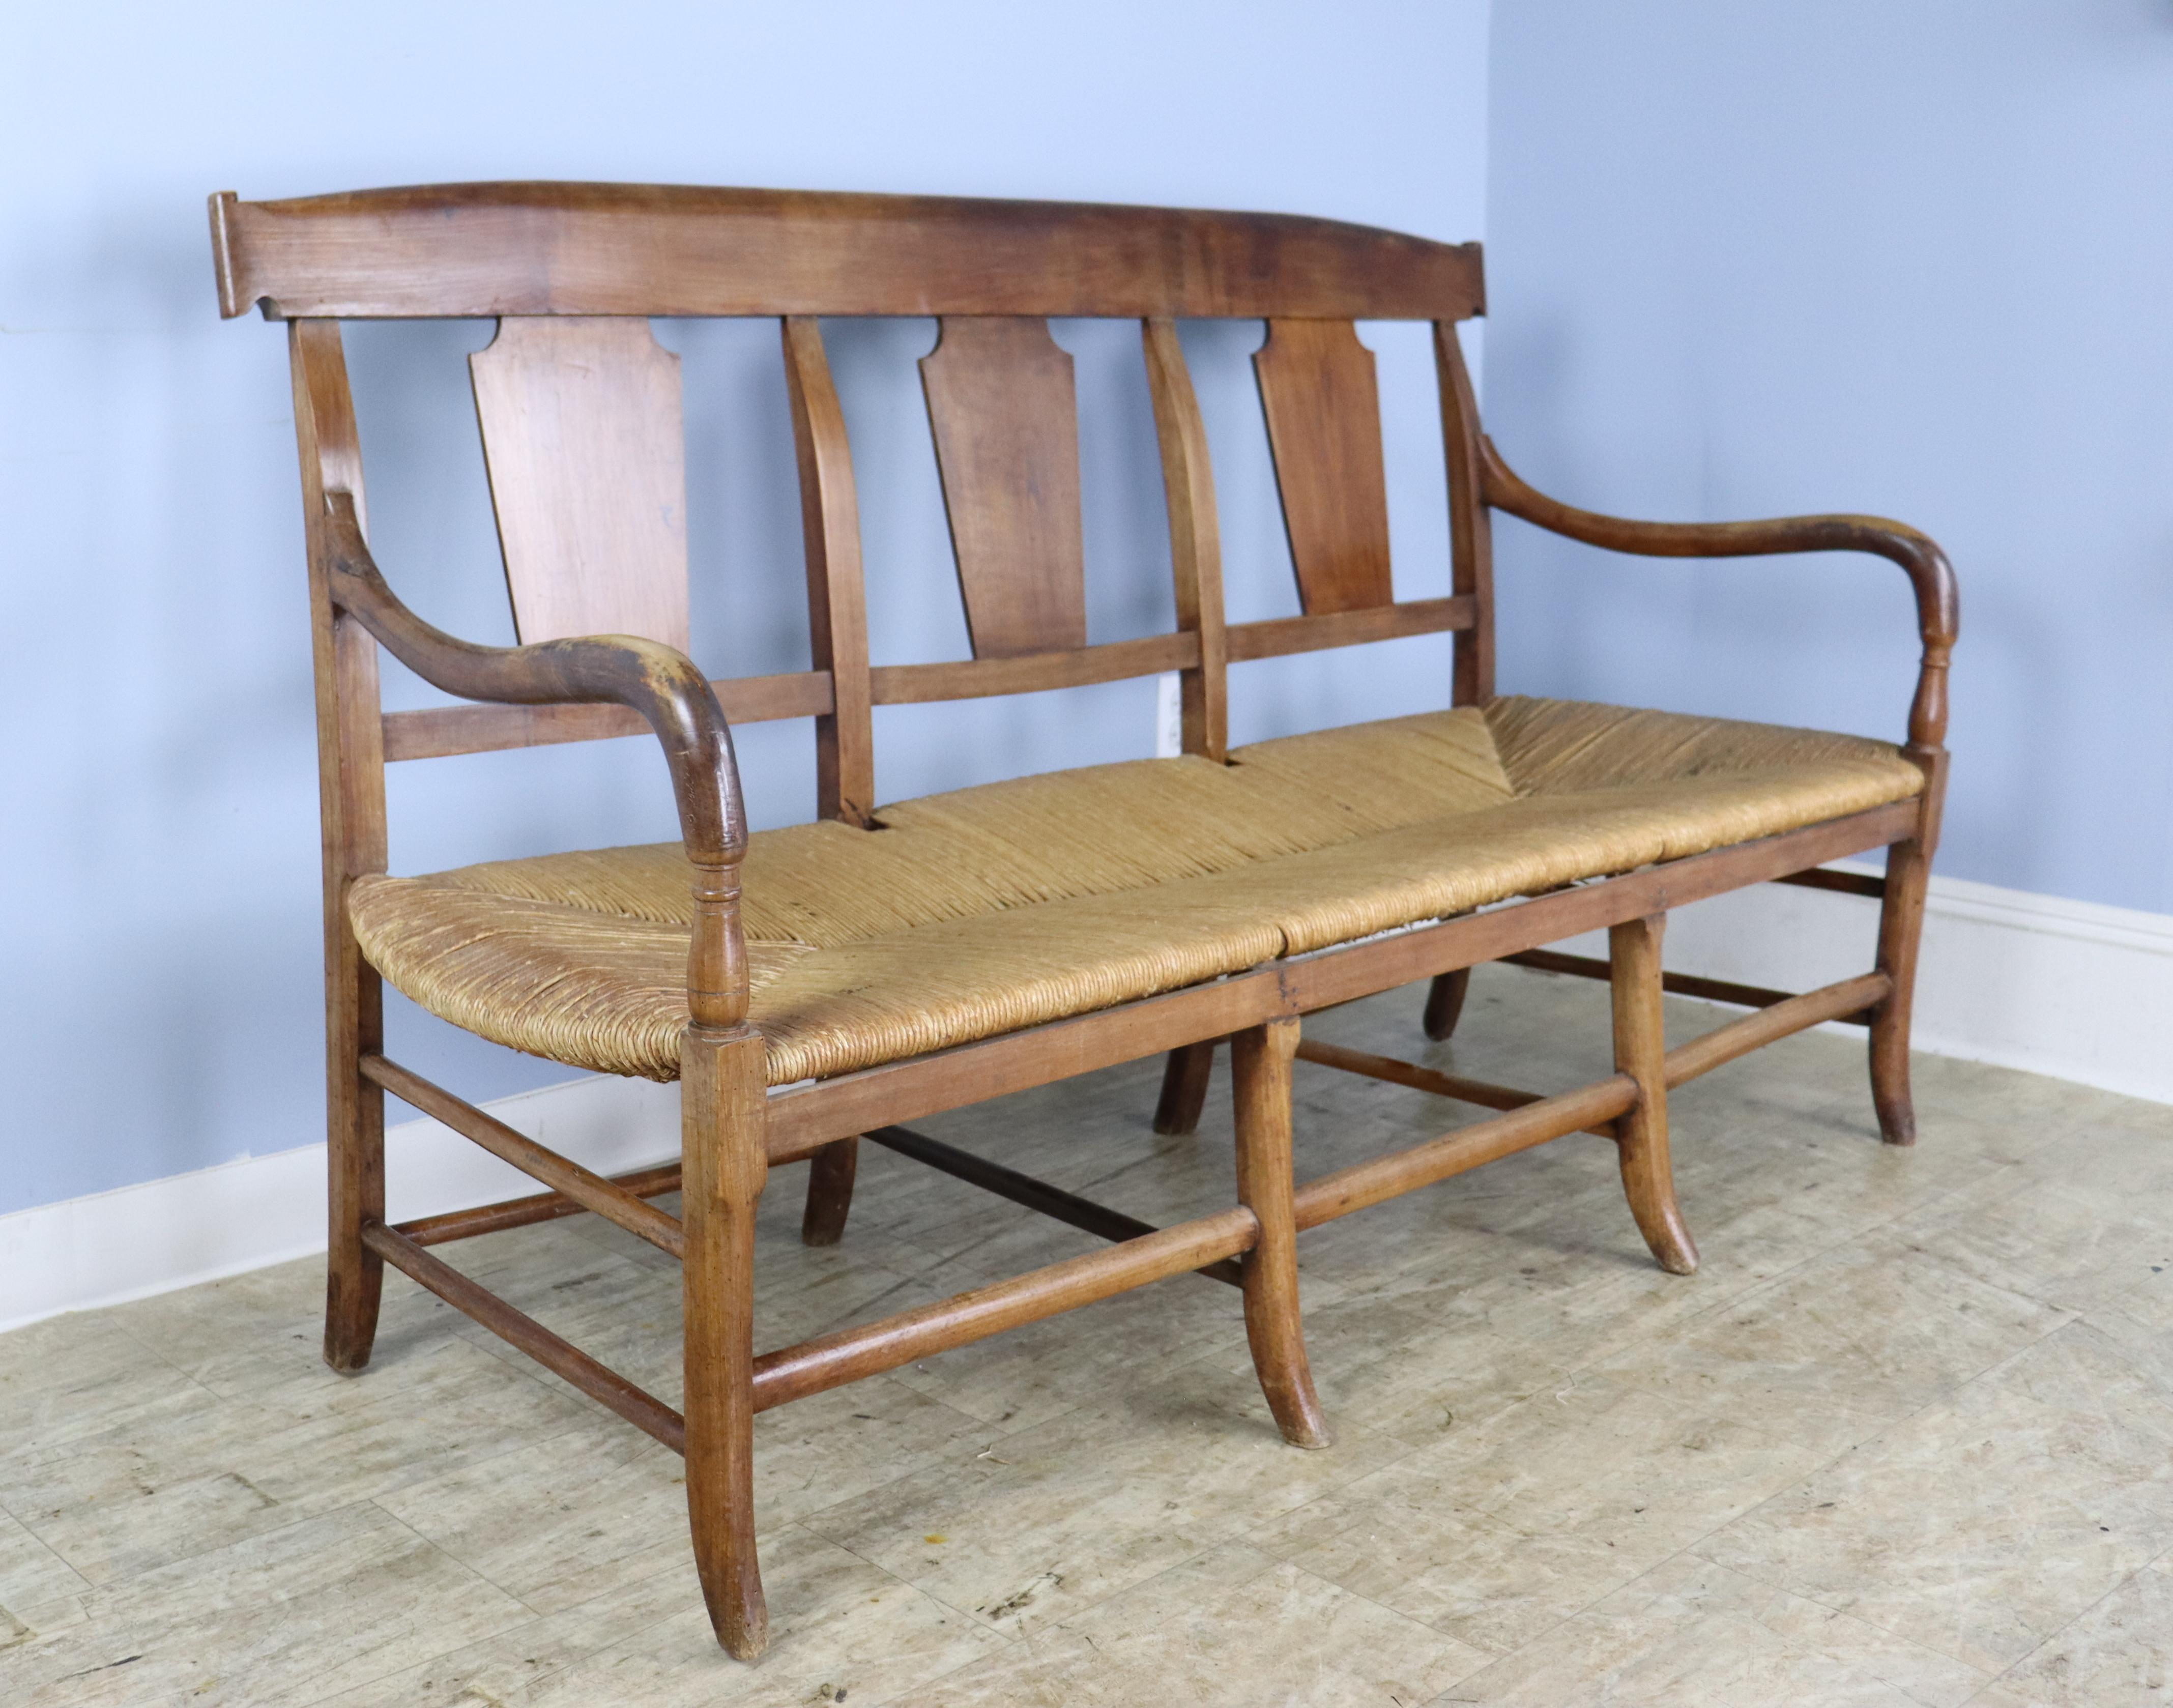 A rush seated French antique bench with Directoire era design elements, specifically the shaped back supports and the carved detial just below the curved arms.  The cherry is a warm brown with good grain and some period appropriate wear, and the